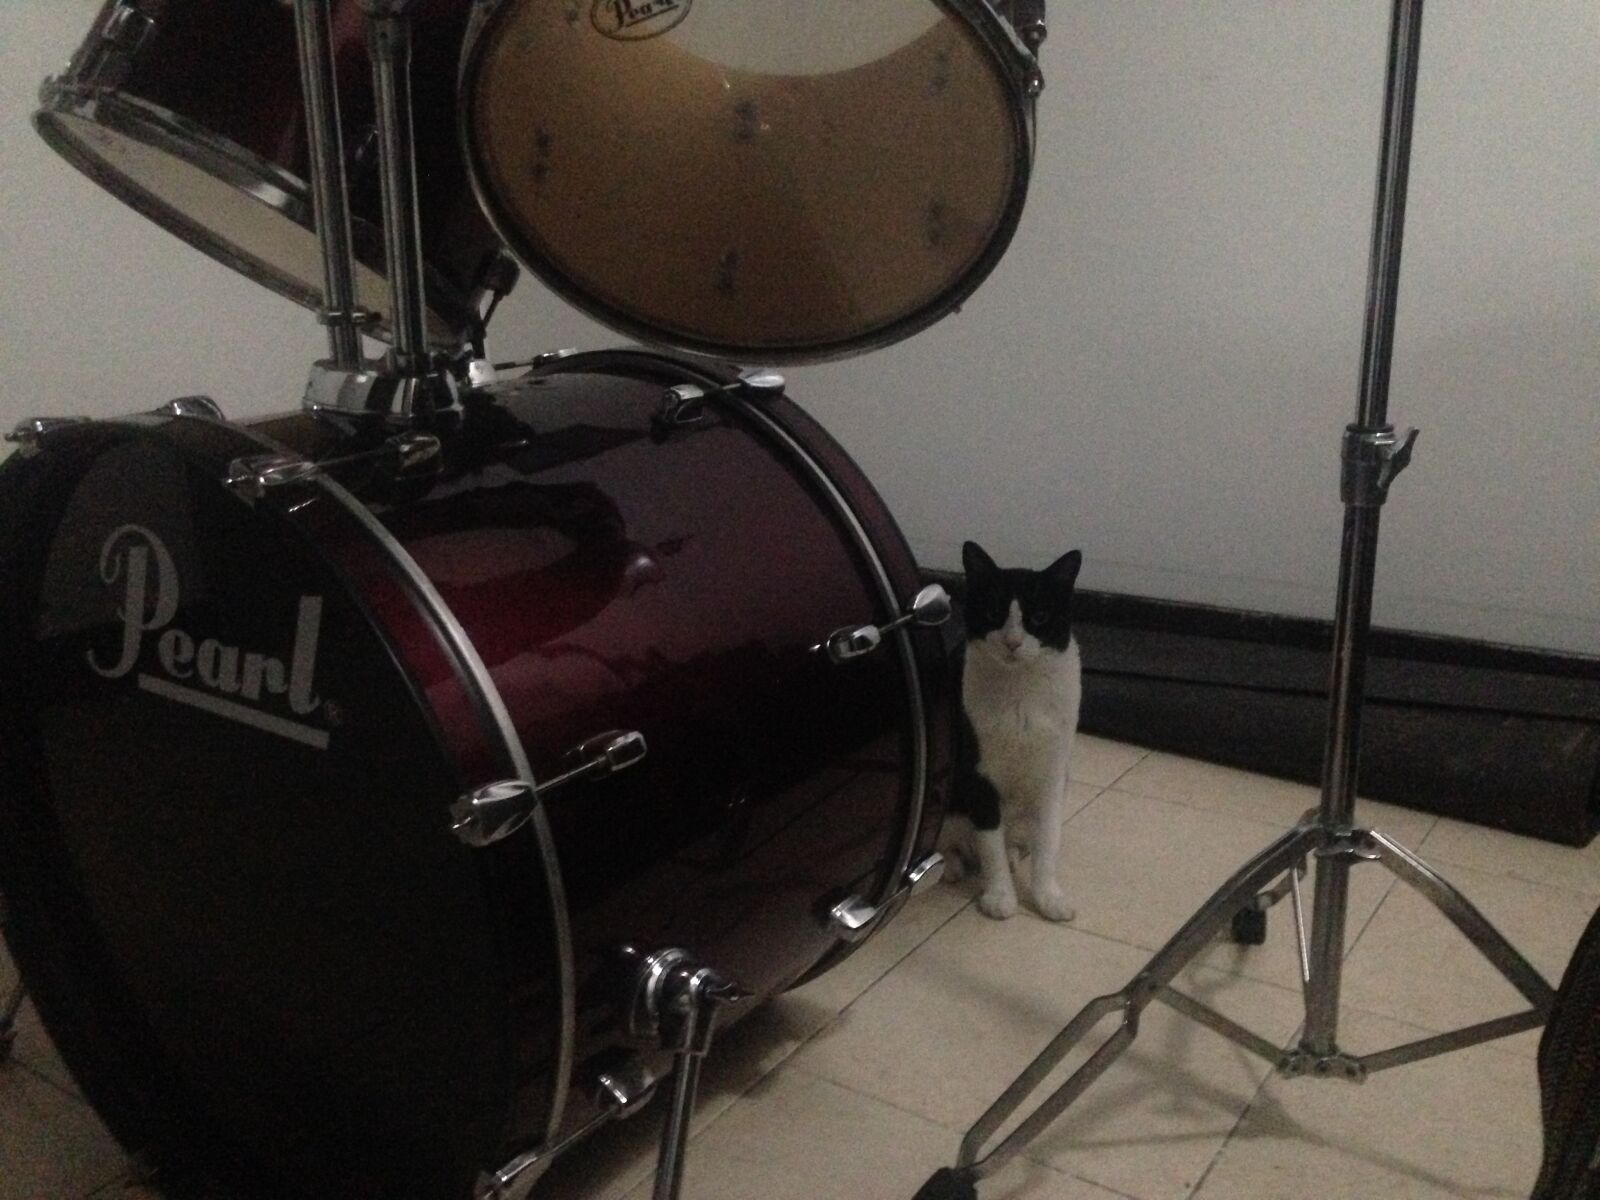 Apple iPhone 5c sample photo. Cat, drums, music photography